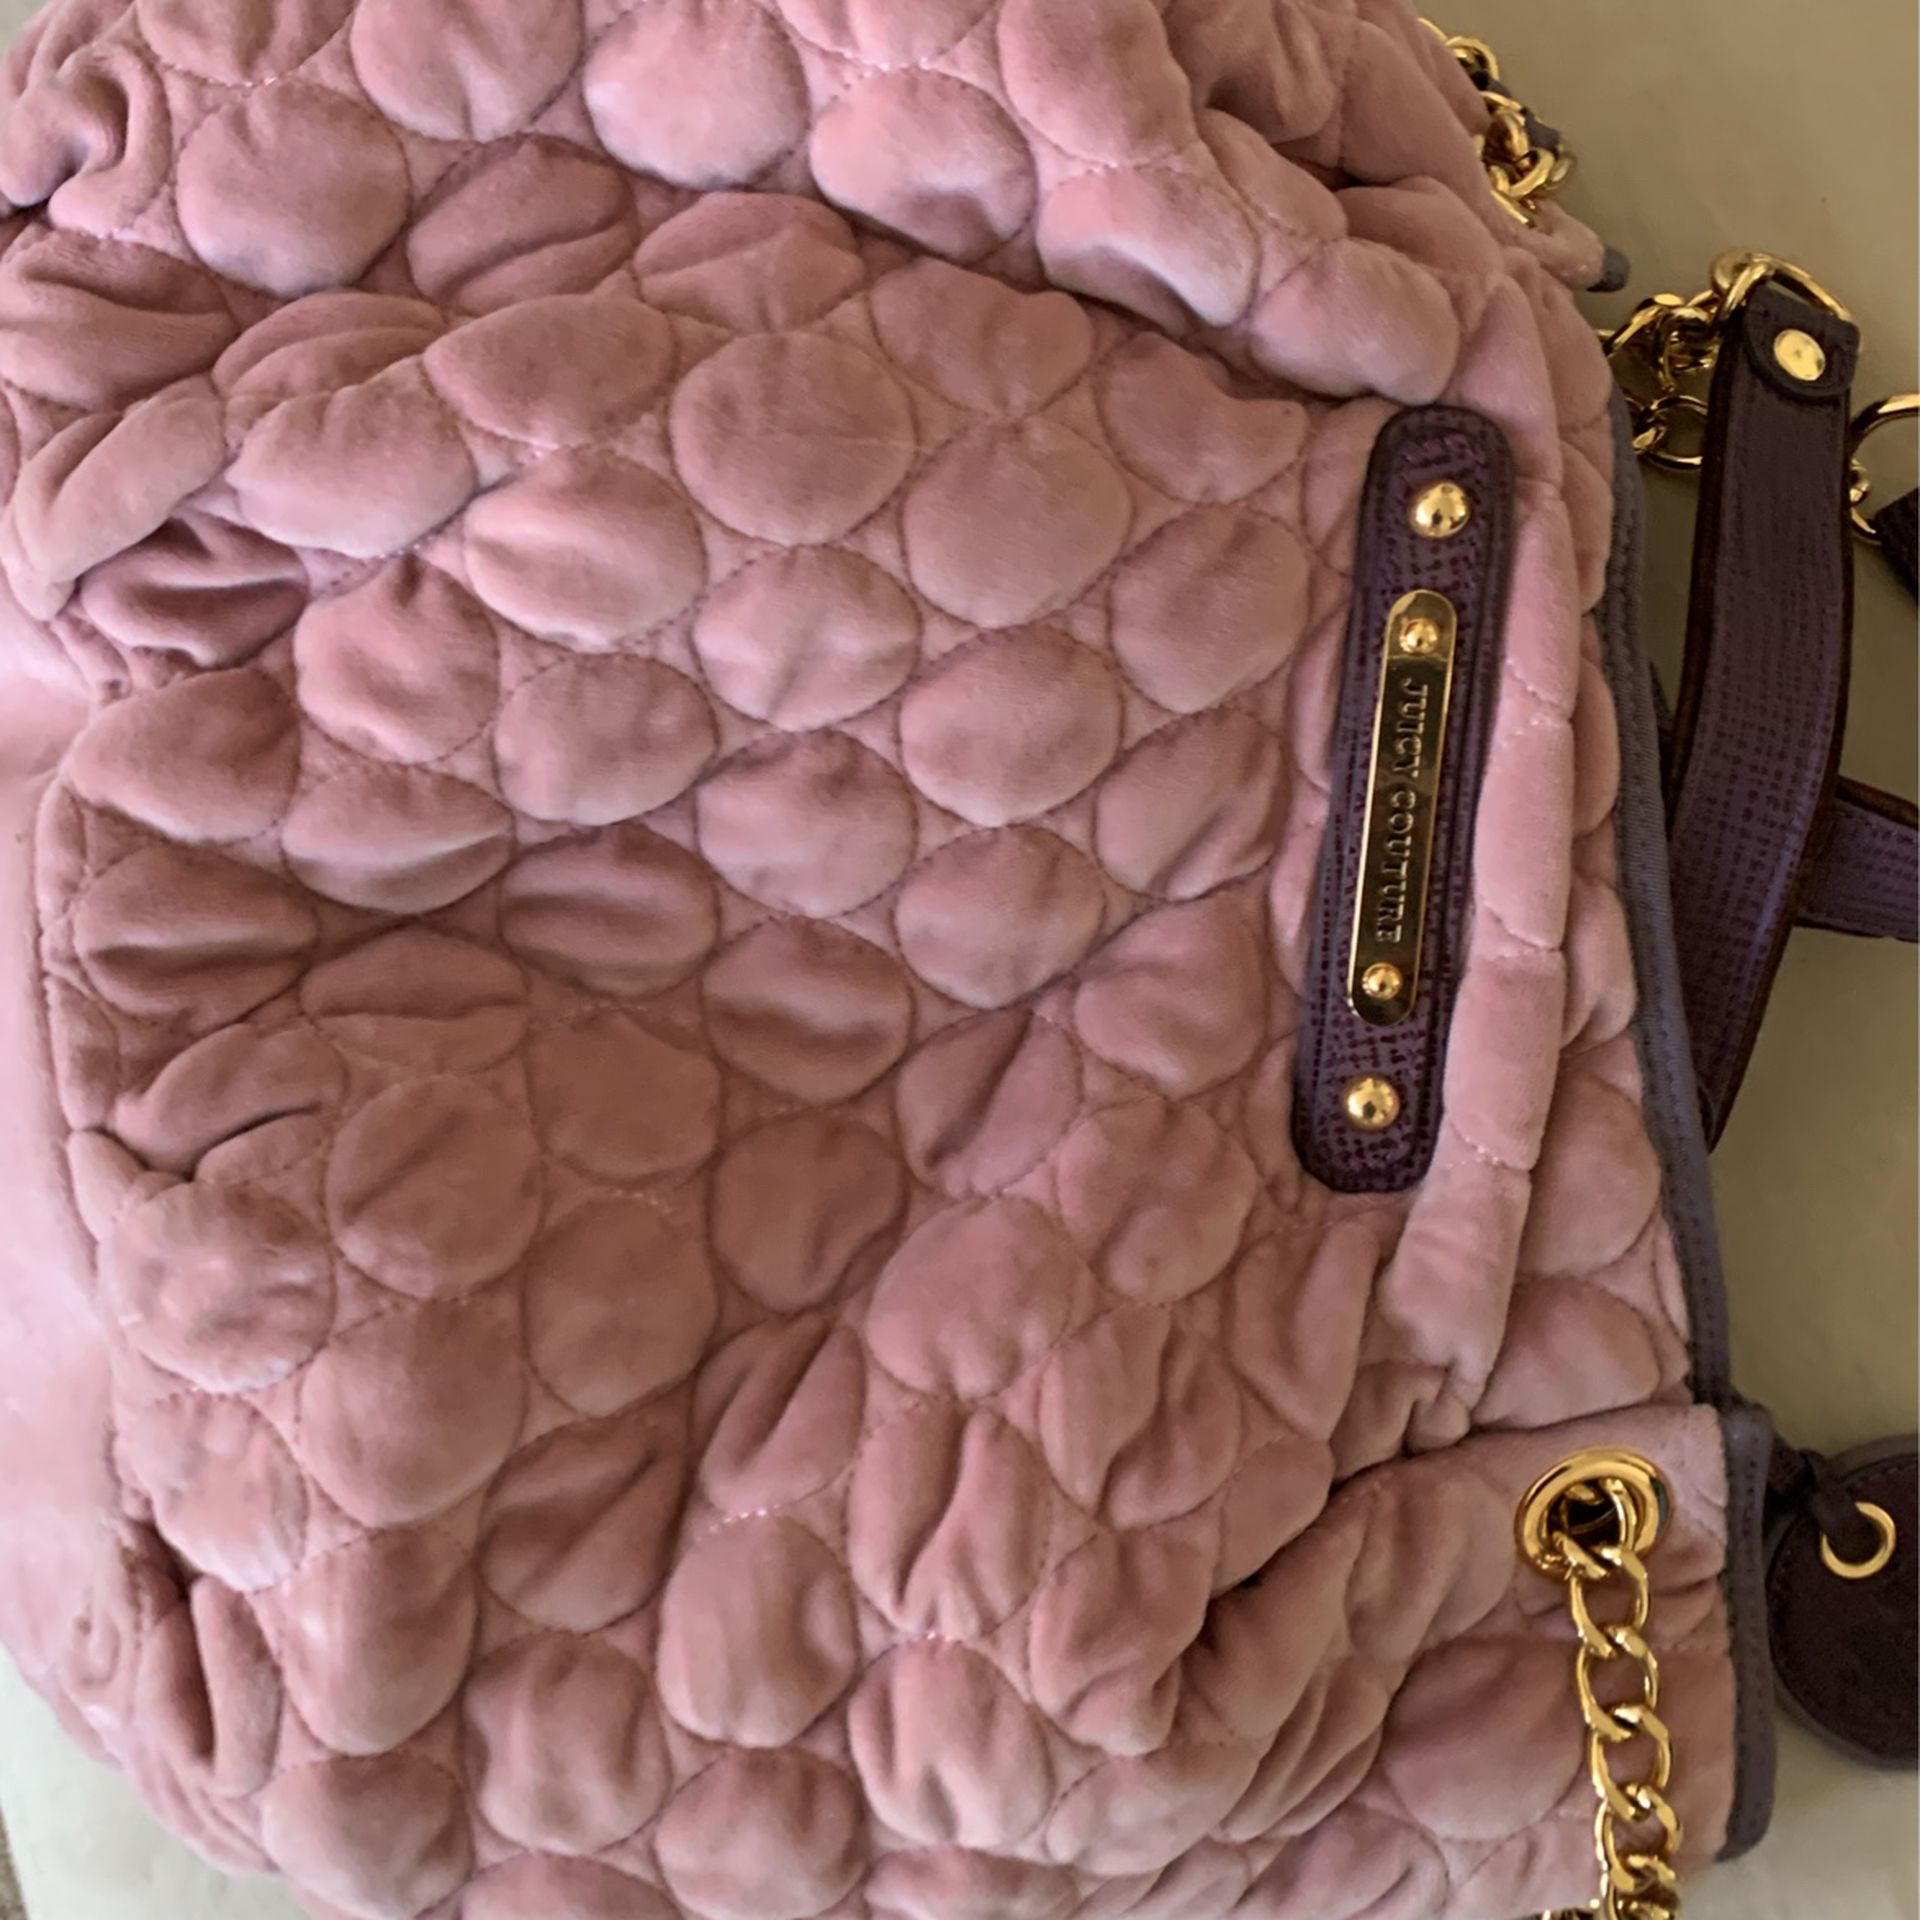 Juicy Couture bag